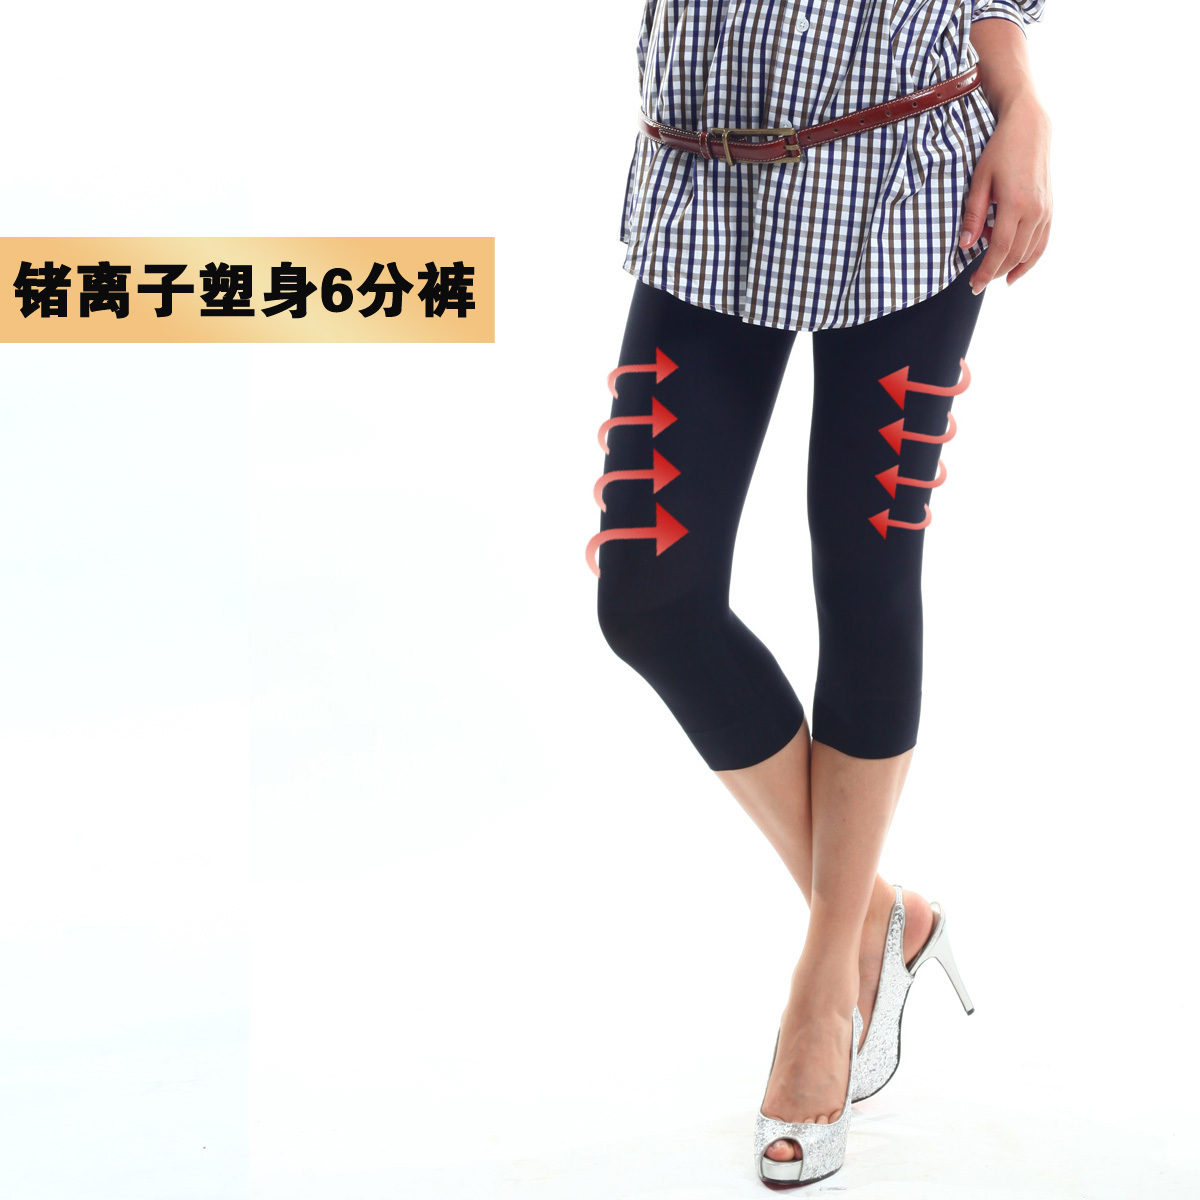 Pinioning curve germanium ion body shaping butt-lifting excellent six pants